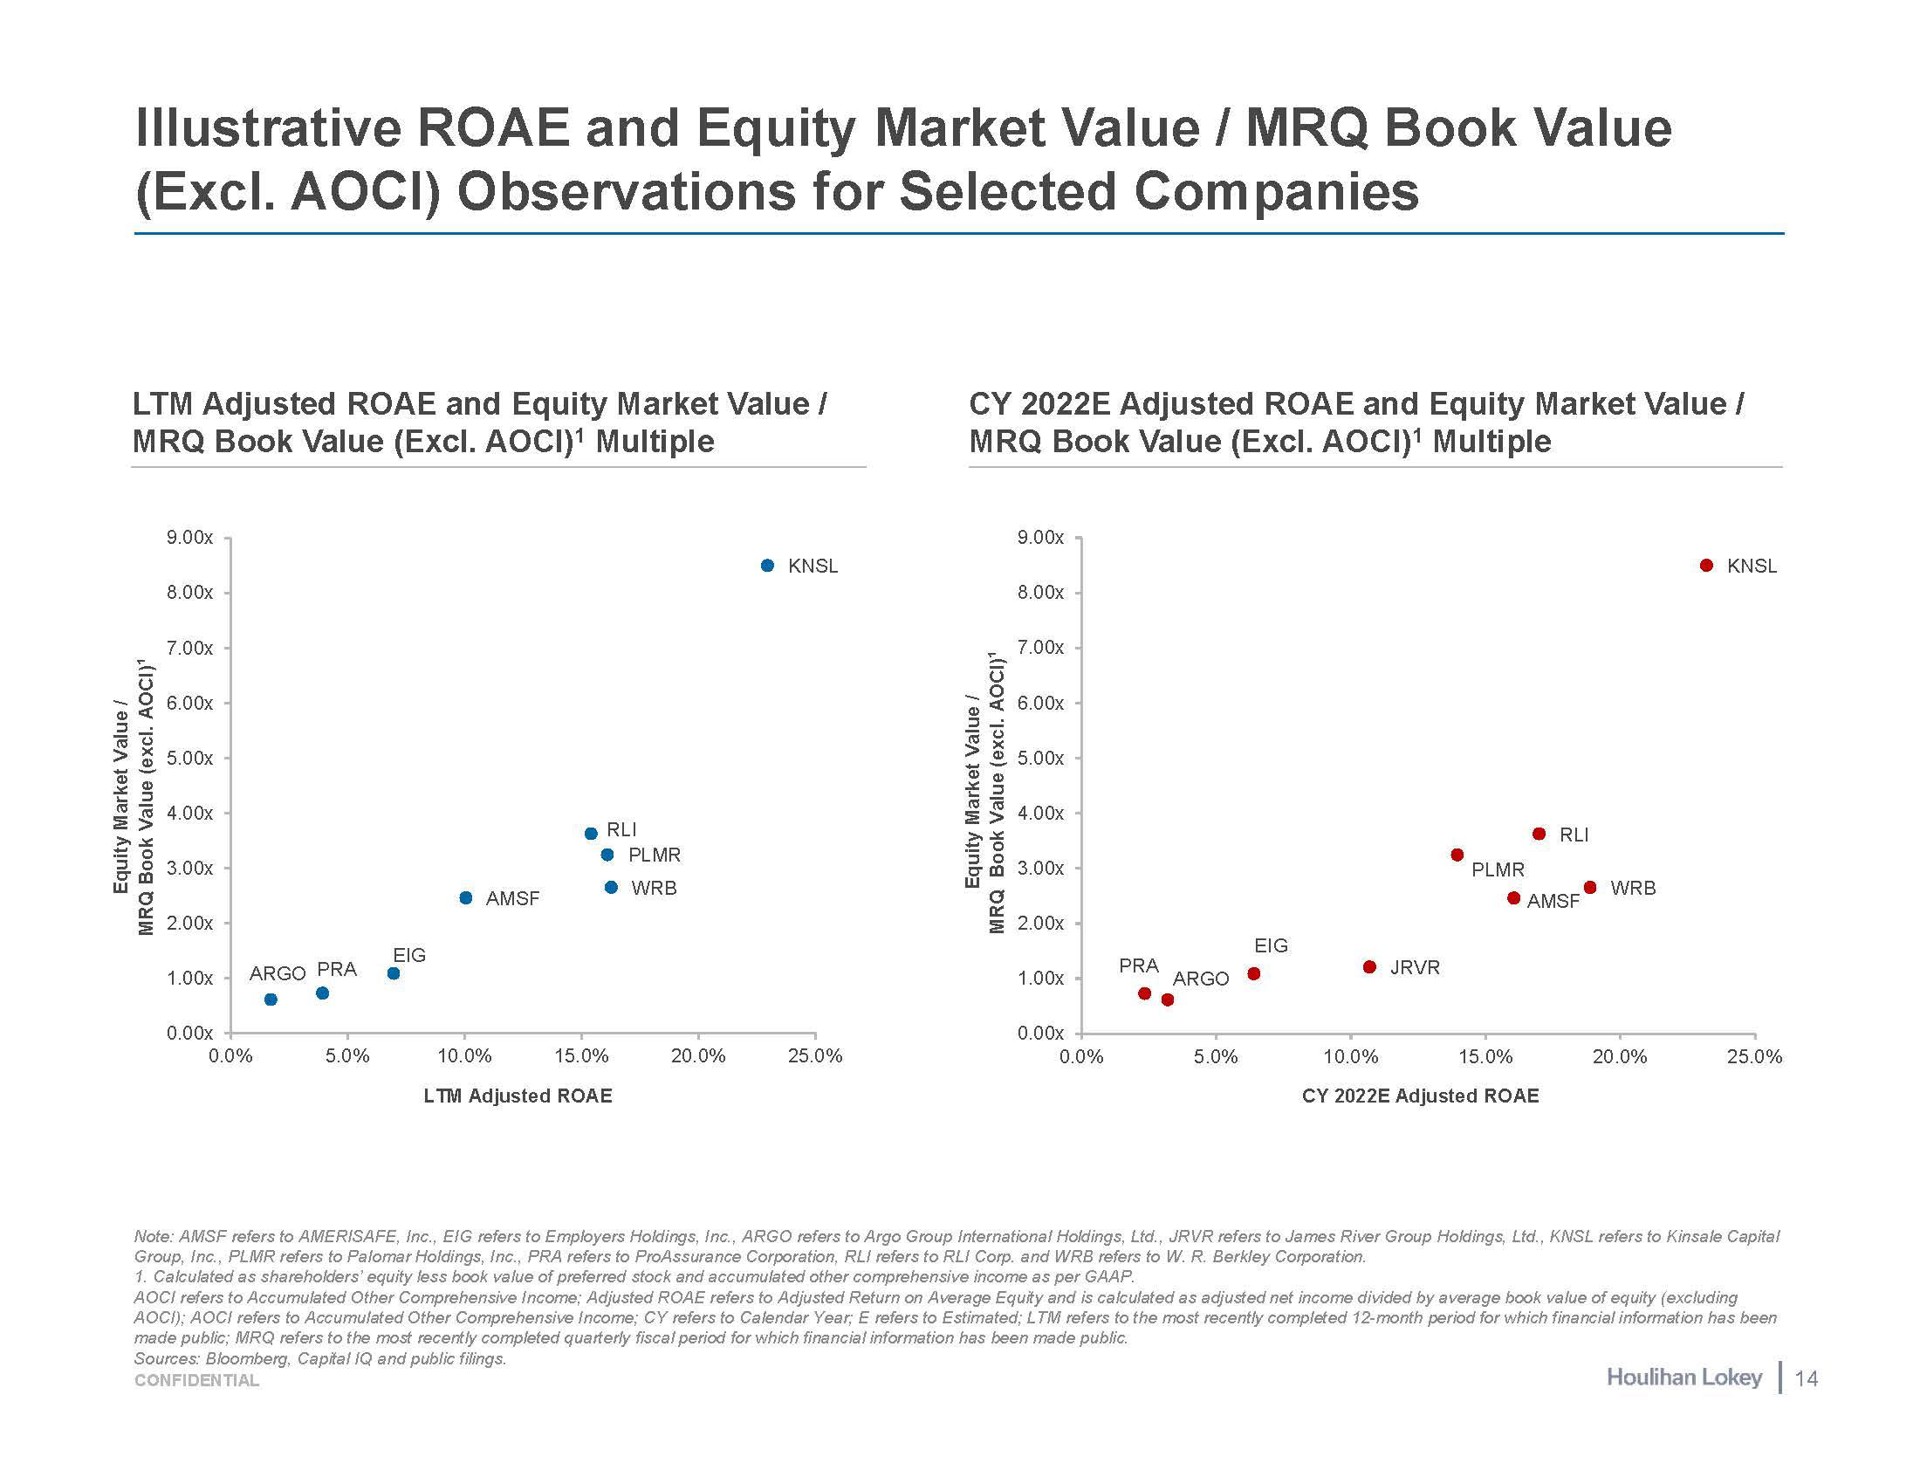 illustrative and equity market value book value observations for selected companies adjusted and equity market value book value multiple adjusted and equity market value book value multiple a argo | Houlihan Lokey